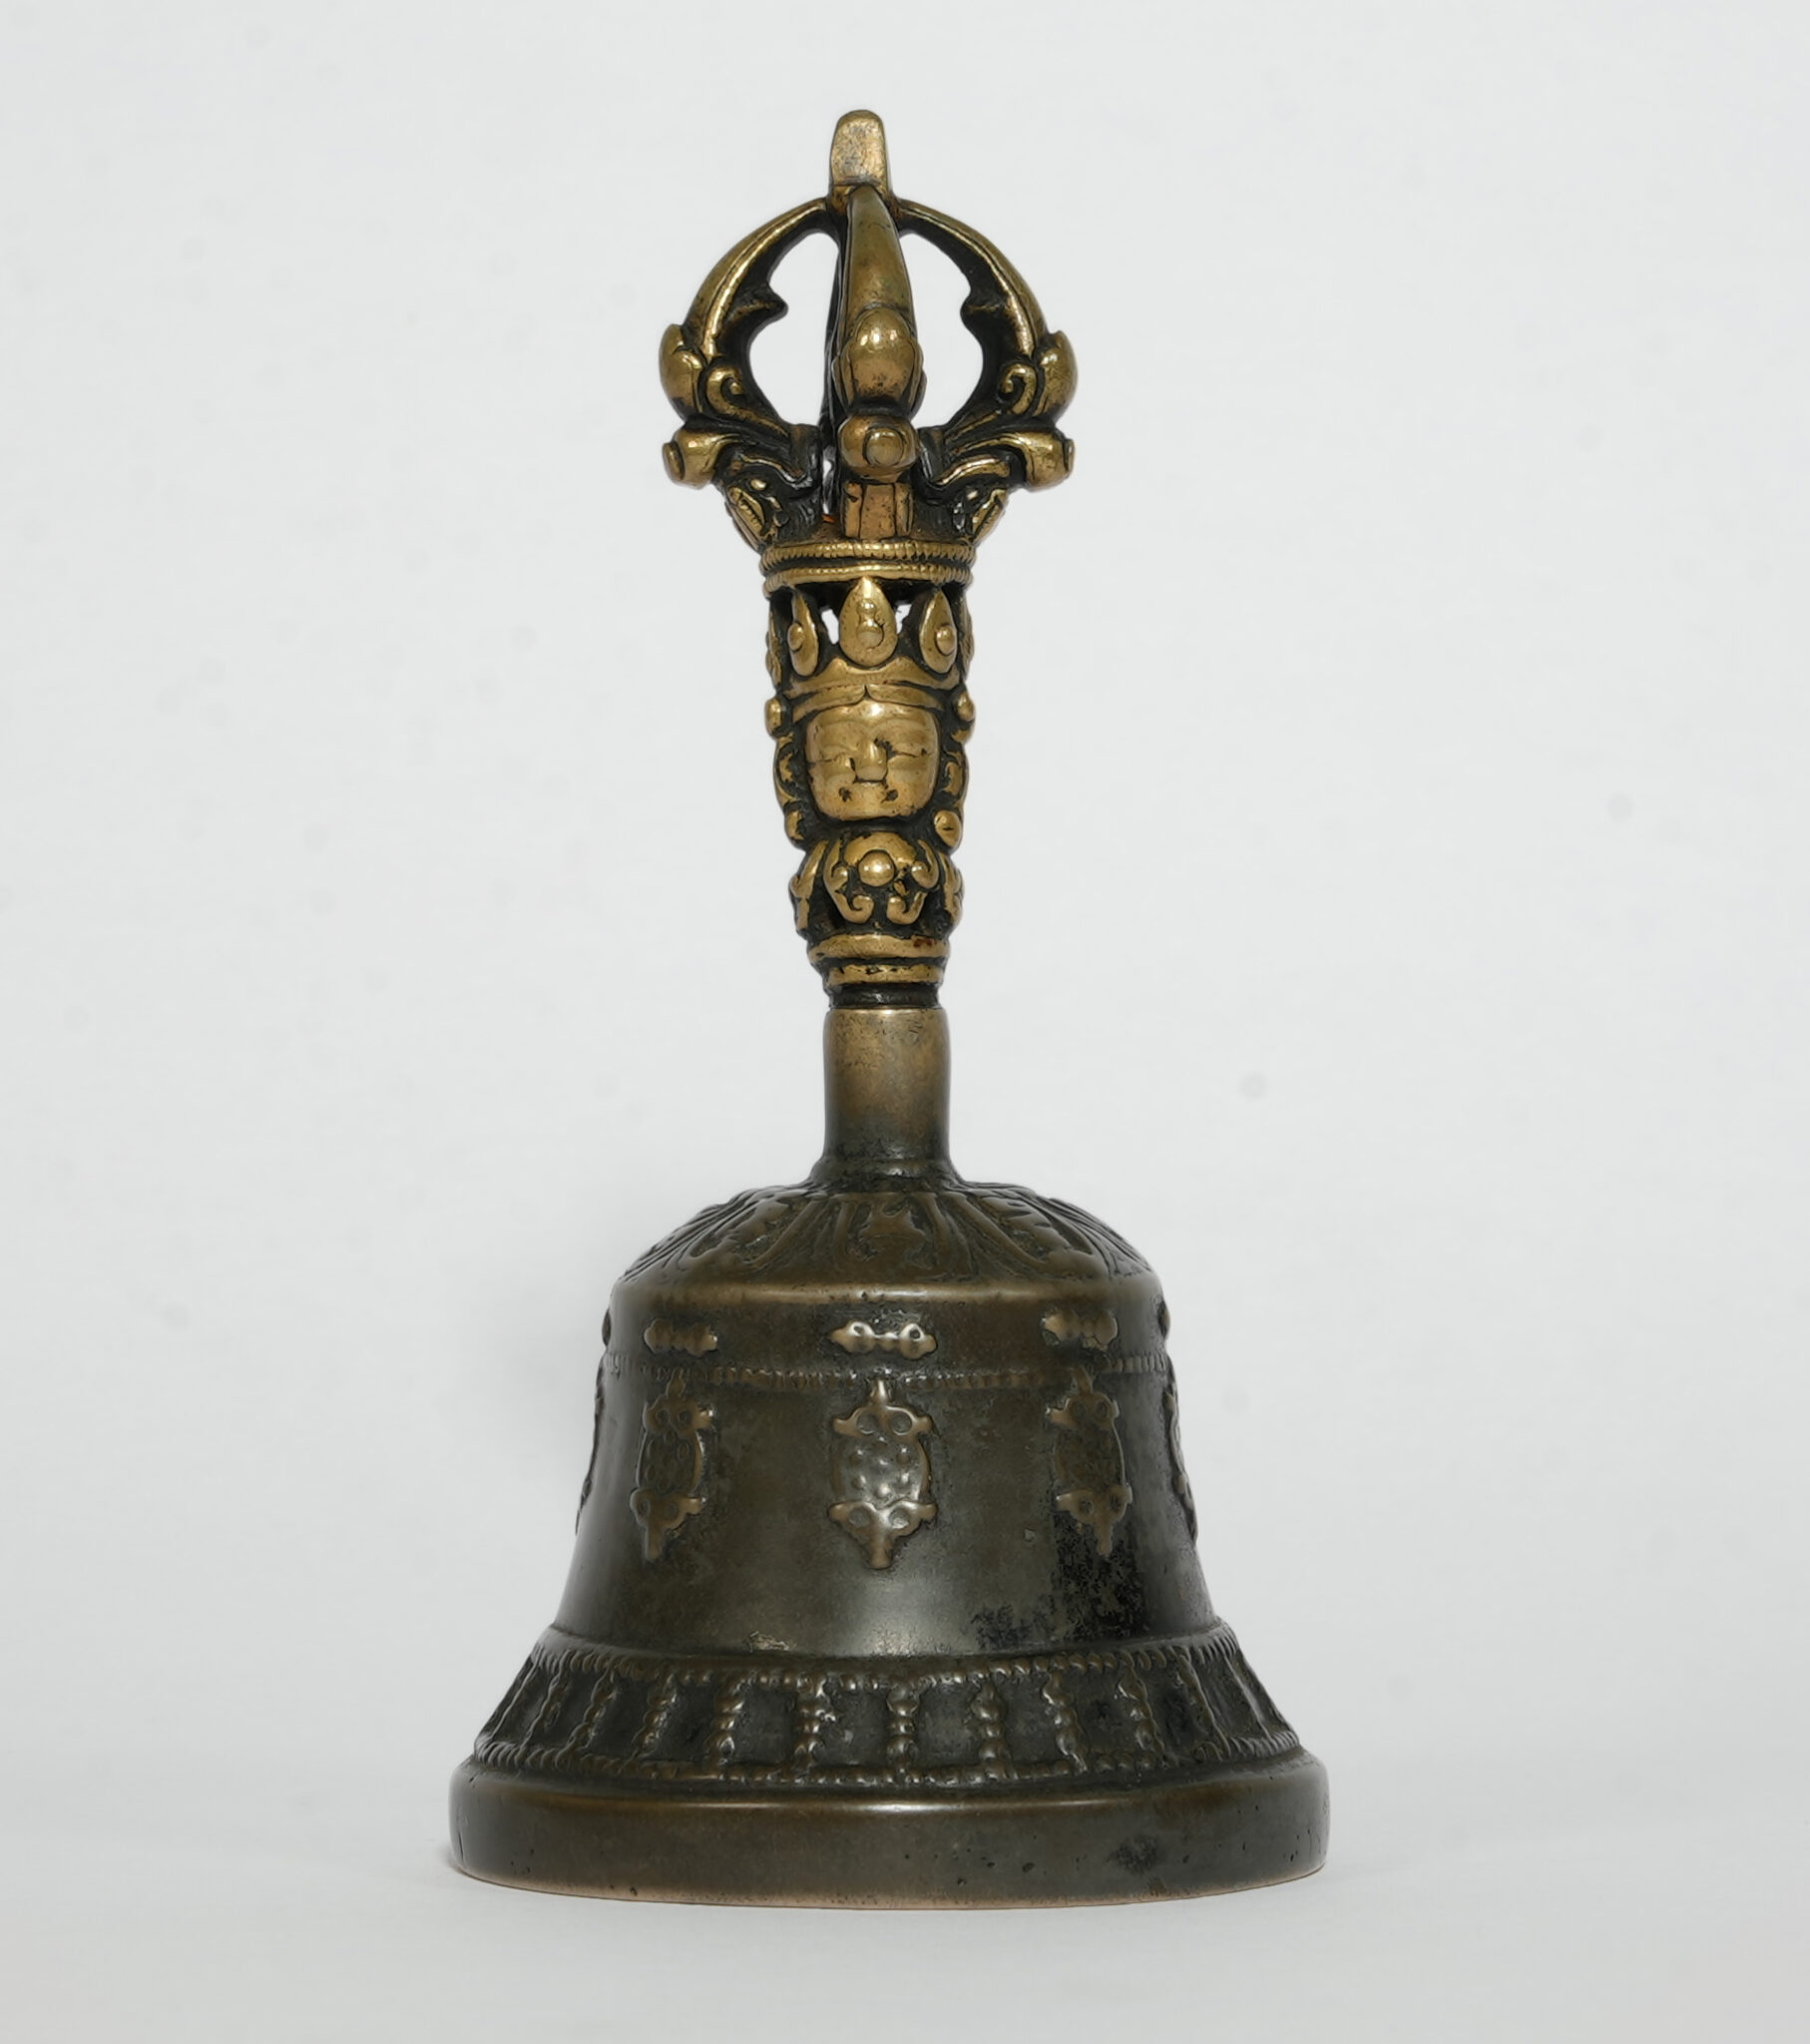 Patinated bronze hand bell featuring handle decorated with faces and vajra-shaped pommel